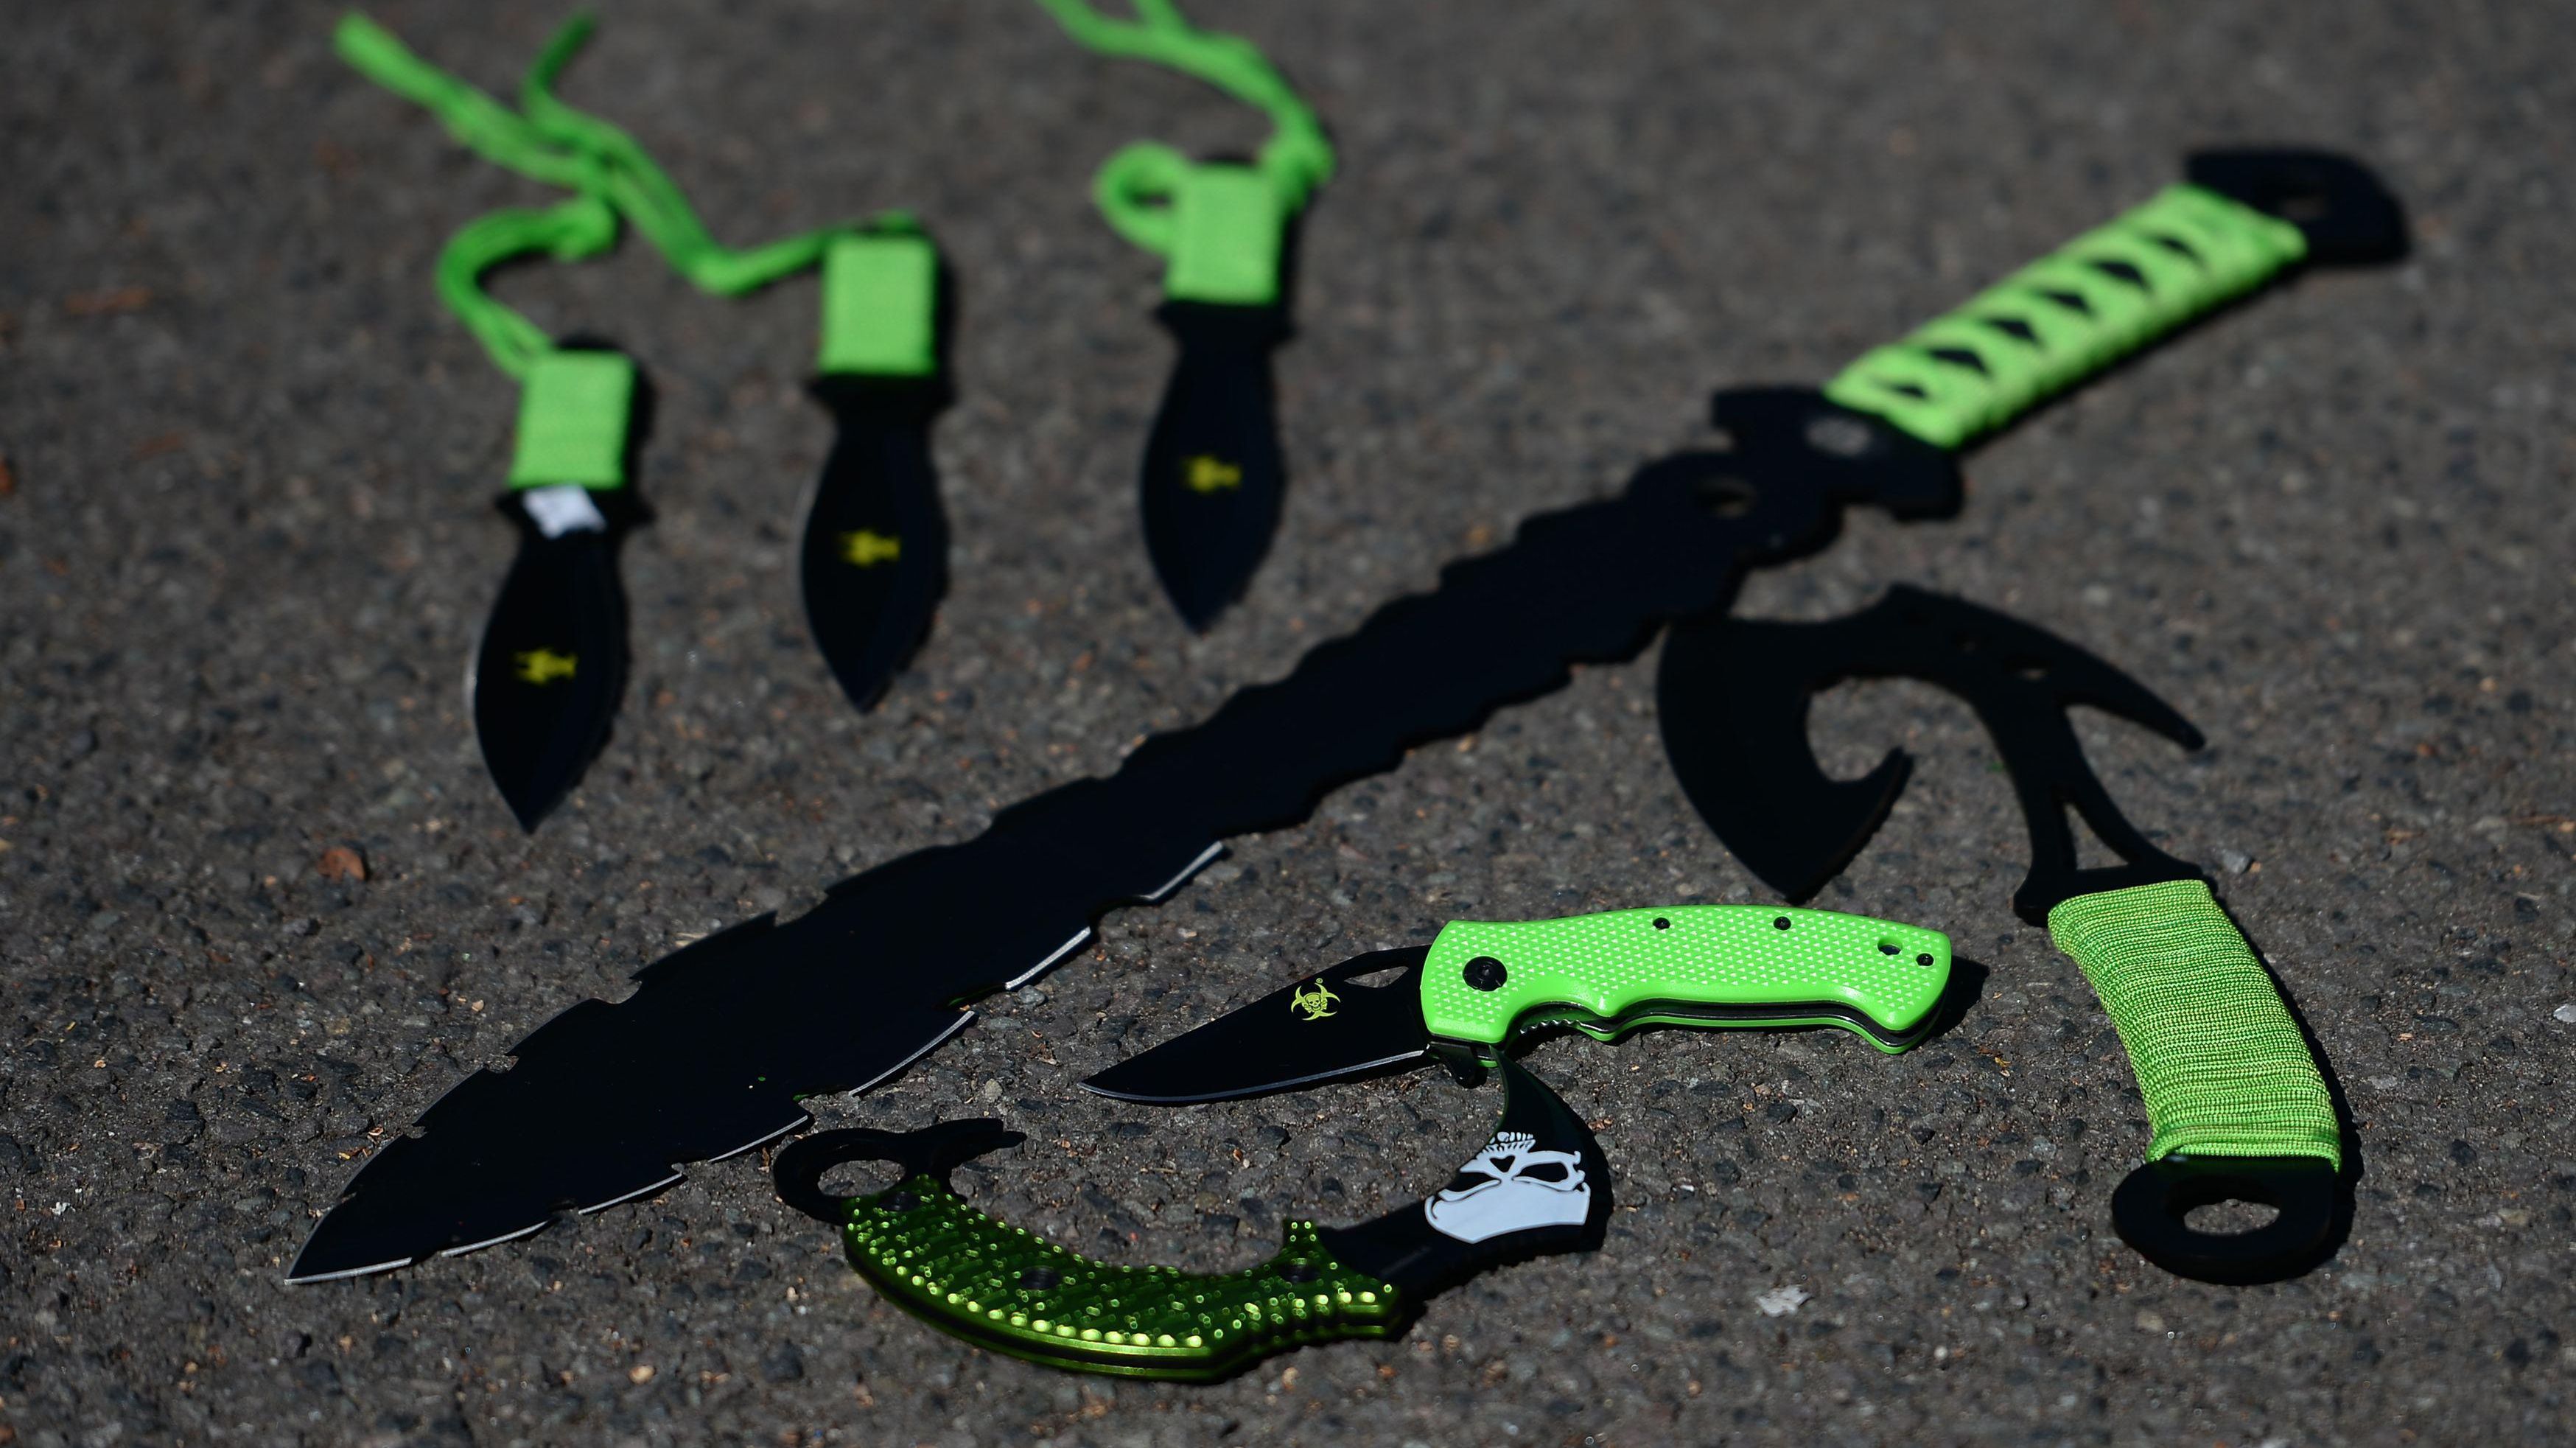 Zombie Knives ?quality=80&format=jpg&crop=290,0,2255,3496&resize=crop